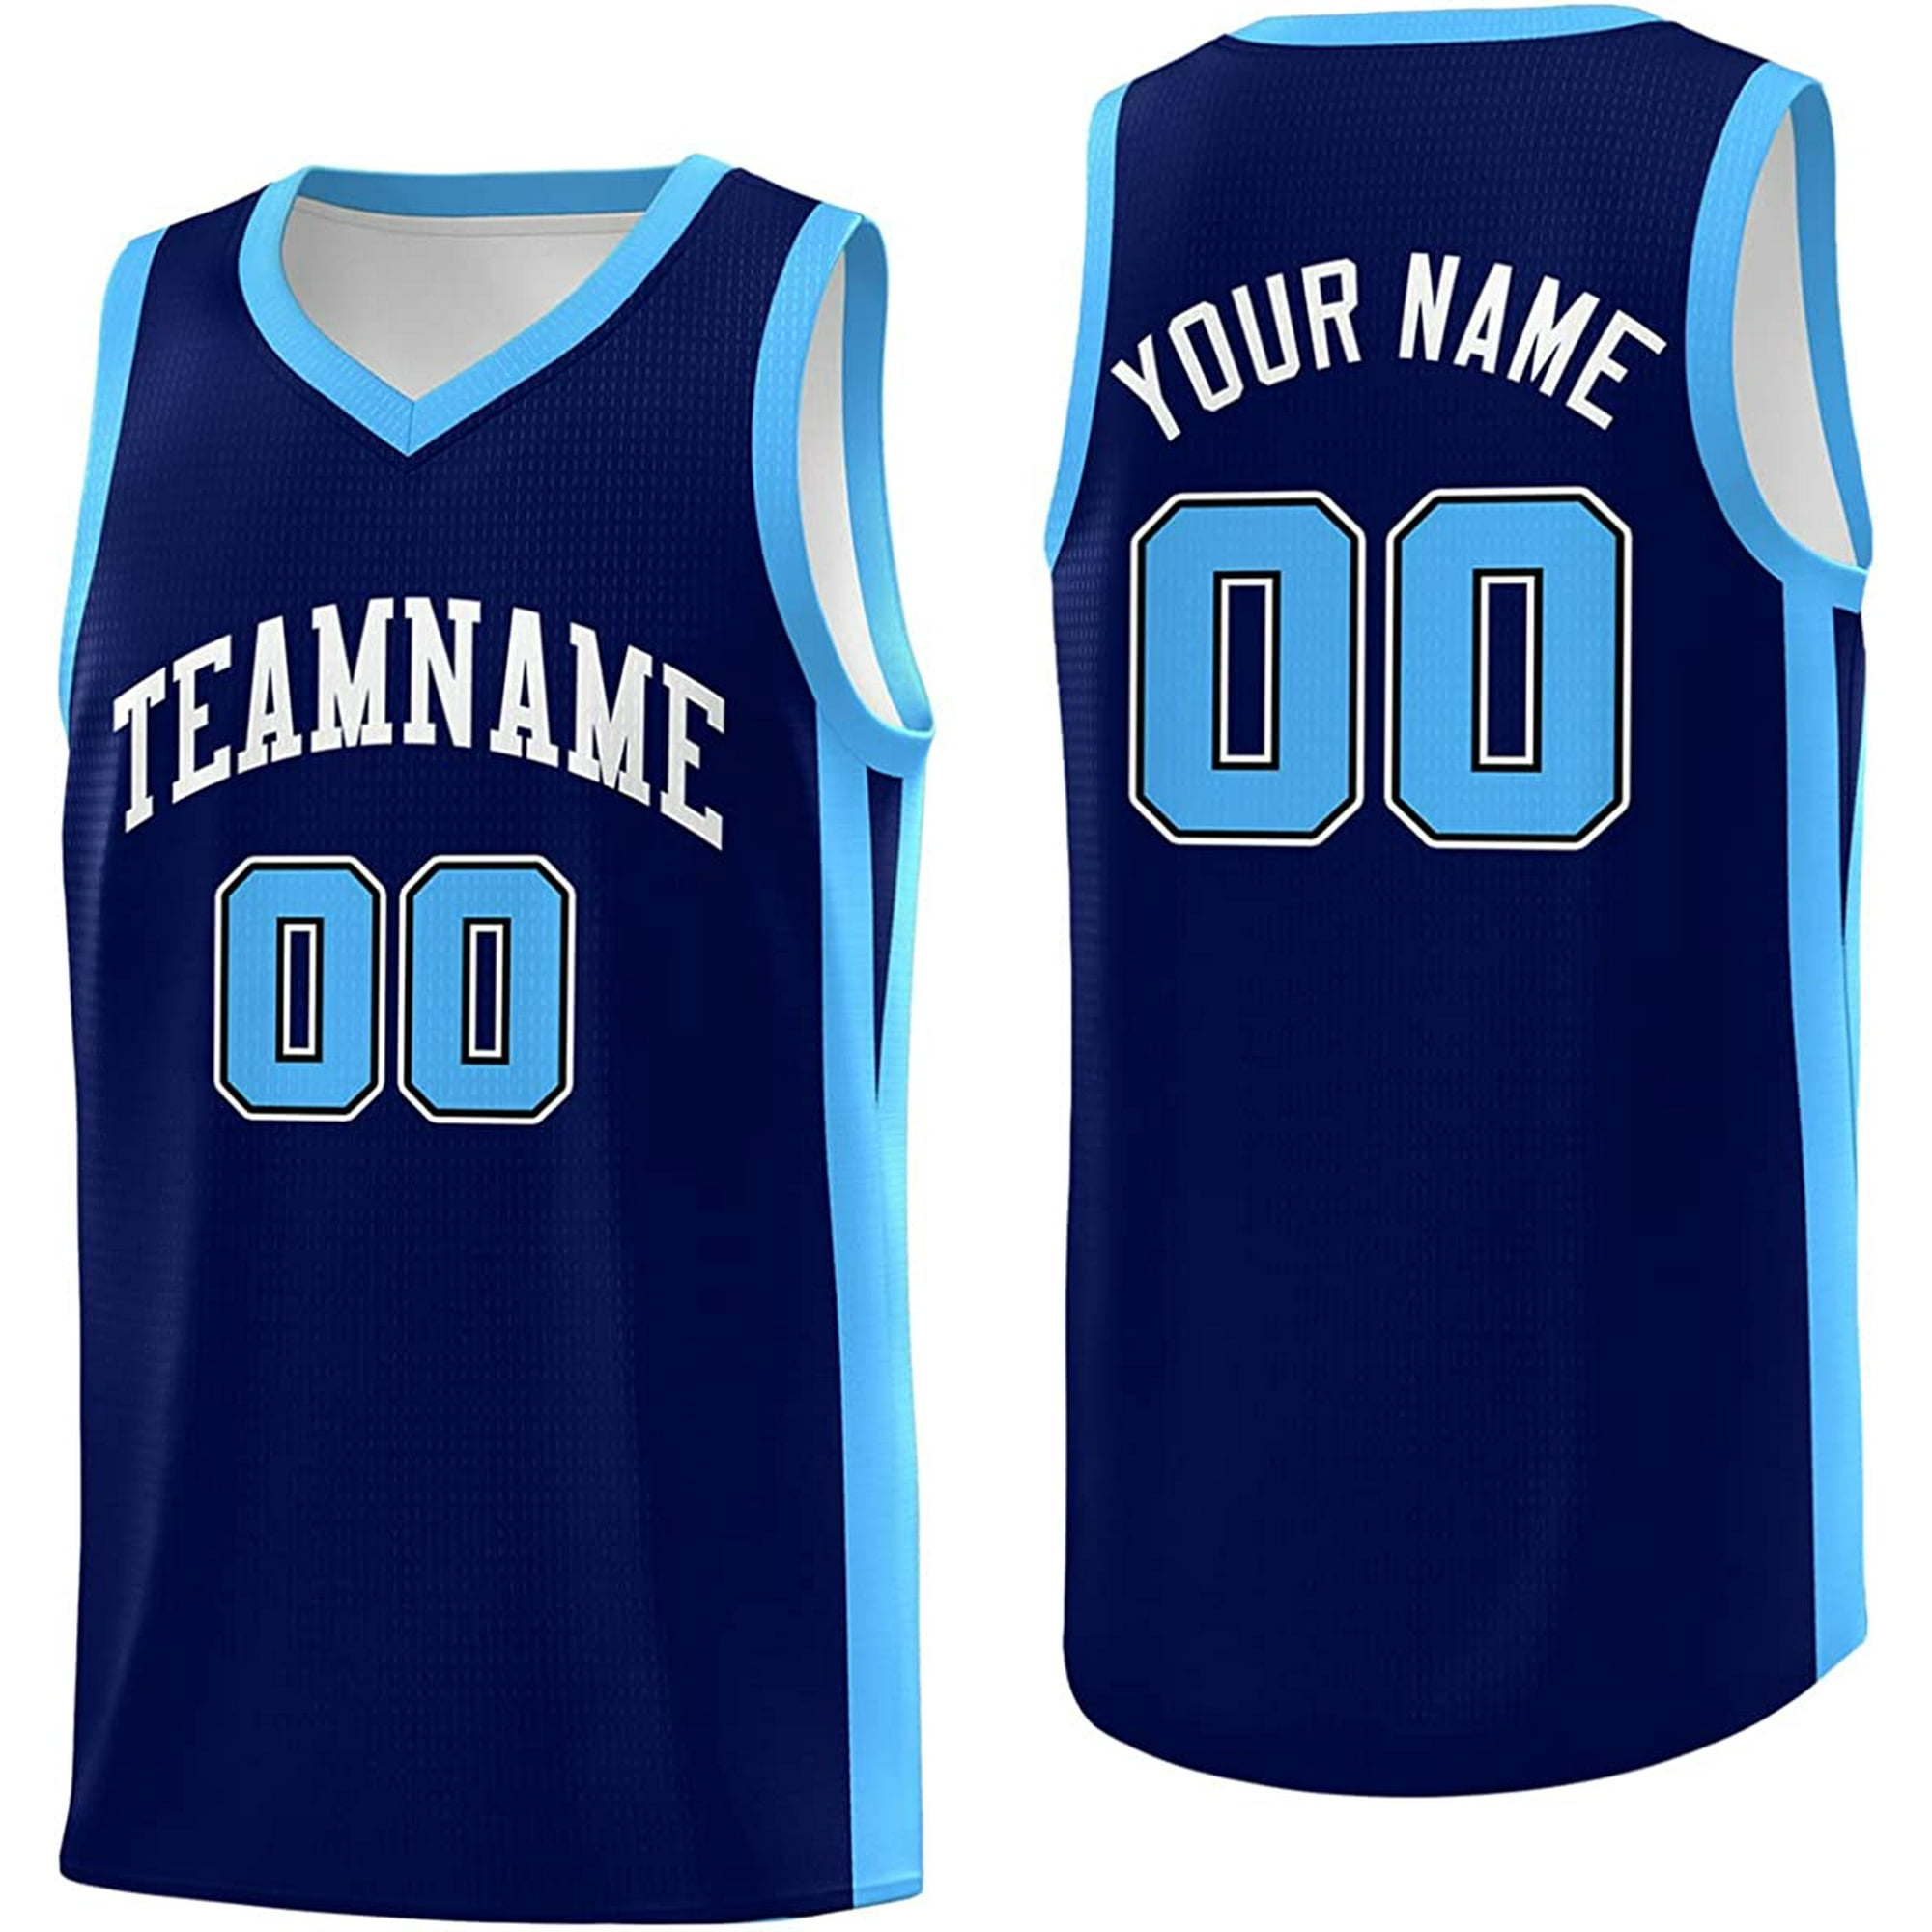 Customized Basketball Jersey - Personalized Name Team Number Logo